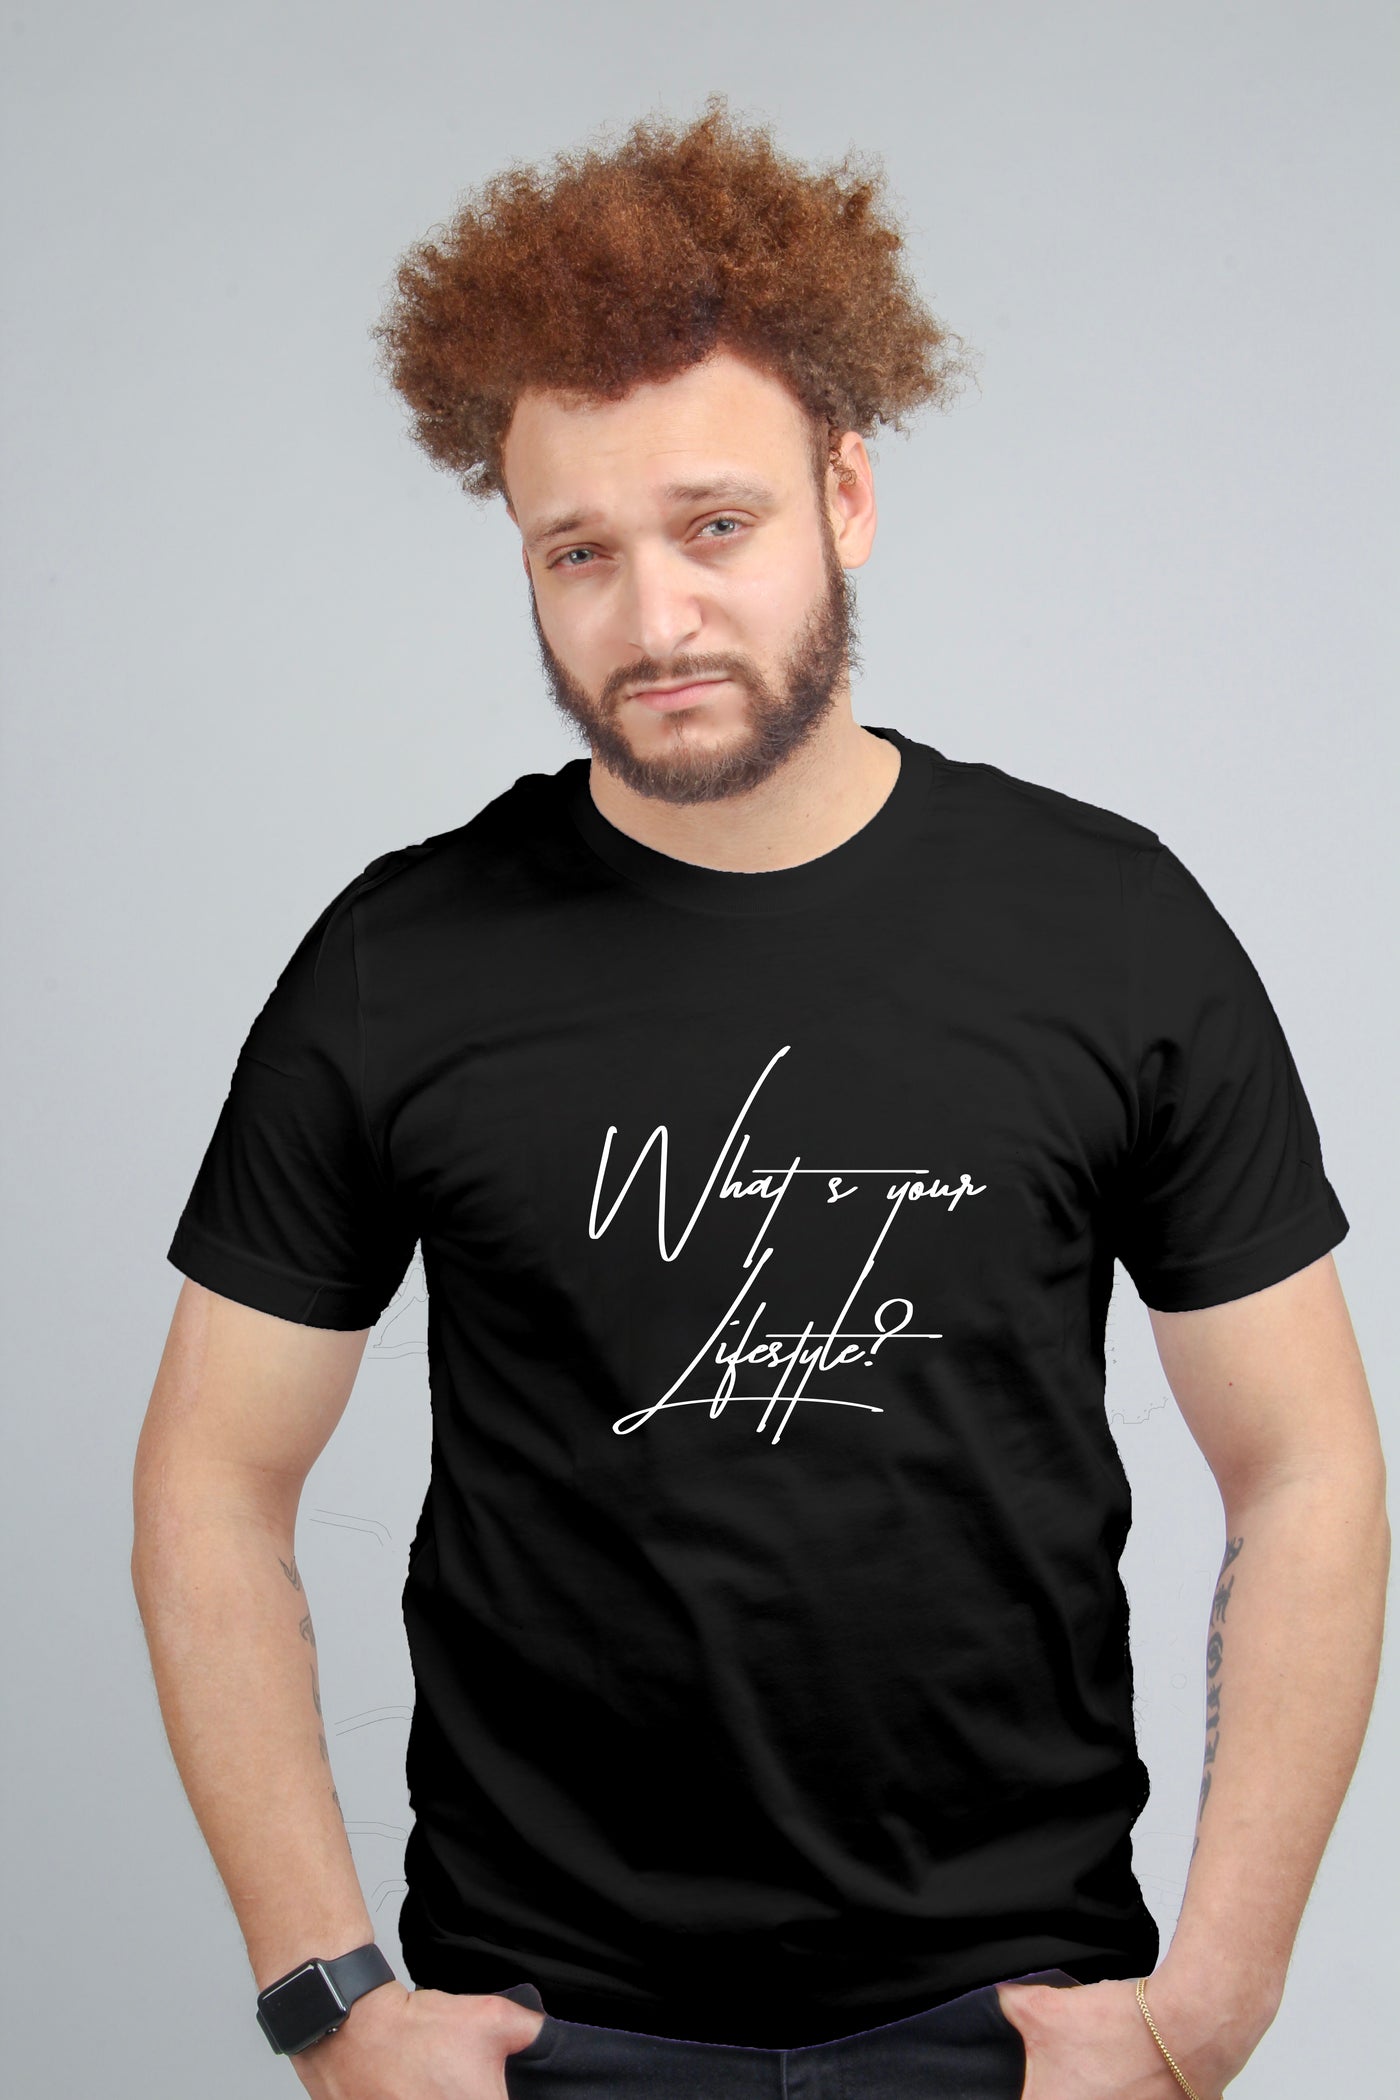 What's Your Lifestyle? Shirt